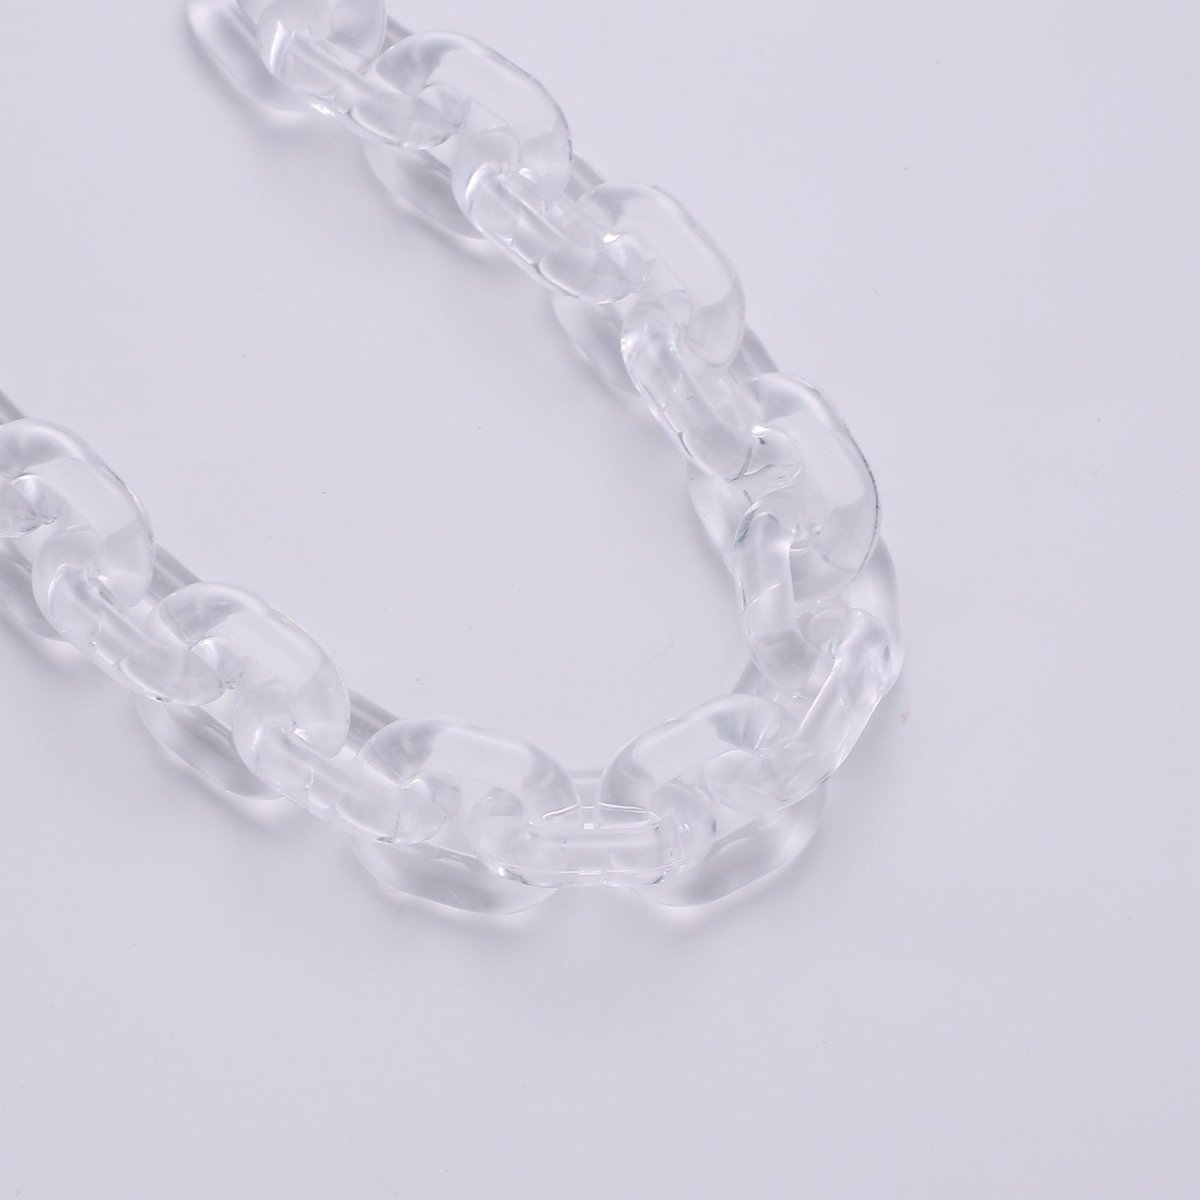 1X Clear Oval Acrylic Link Chain, Translucent Plastic Chain, Chunky Necklace Chain with Open Links Size 23.8mm x 18.8mm - DLUXCA